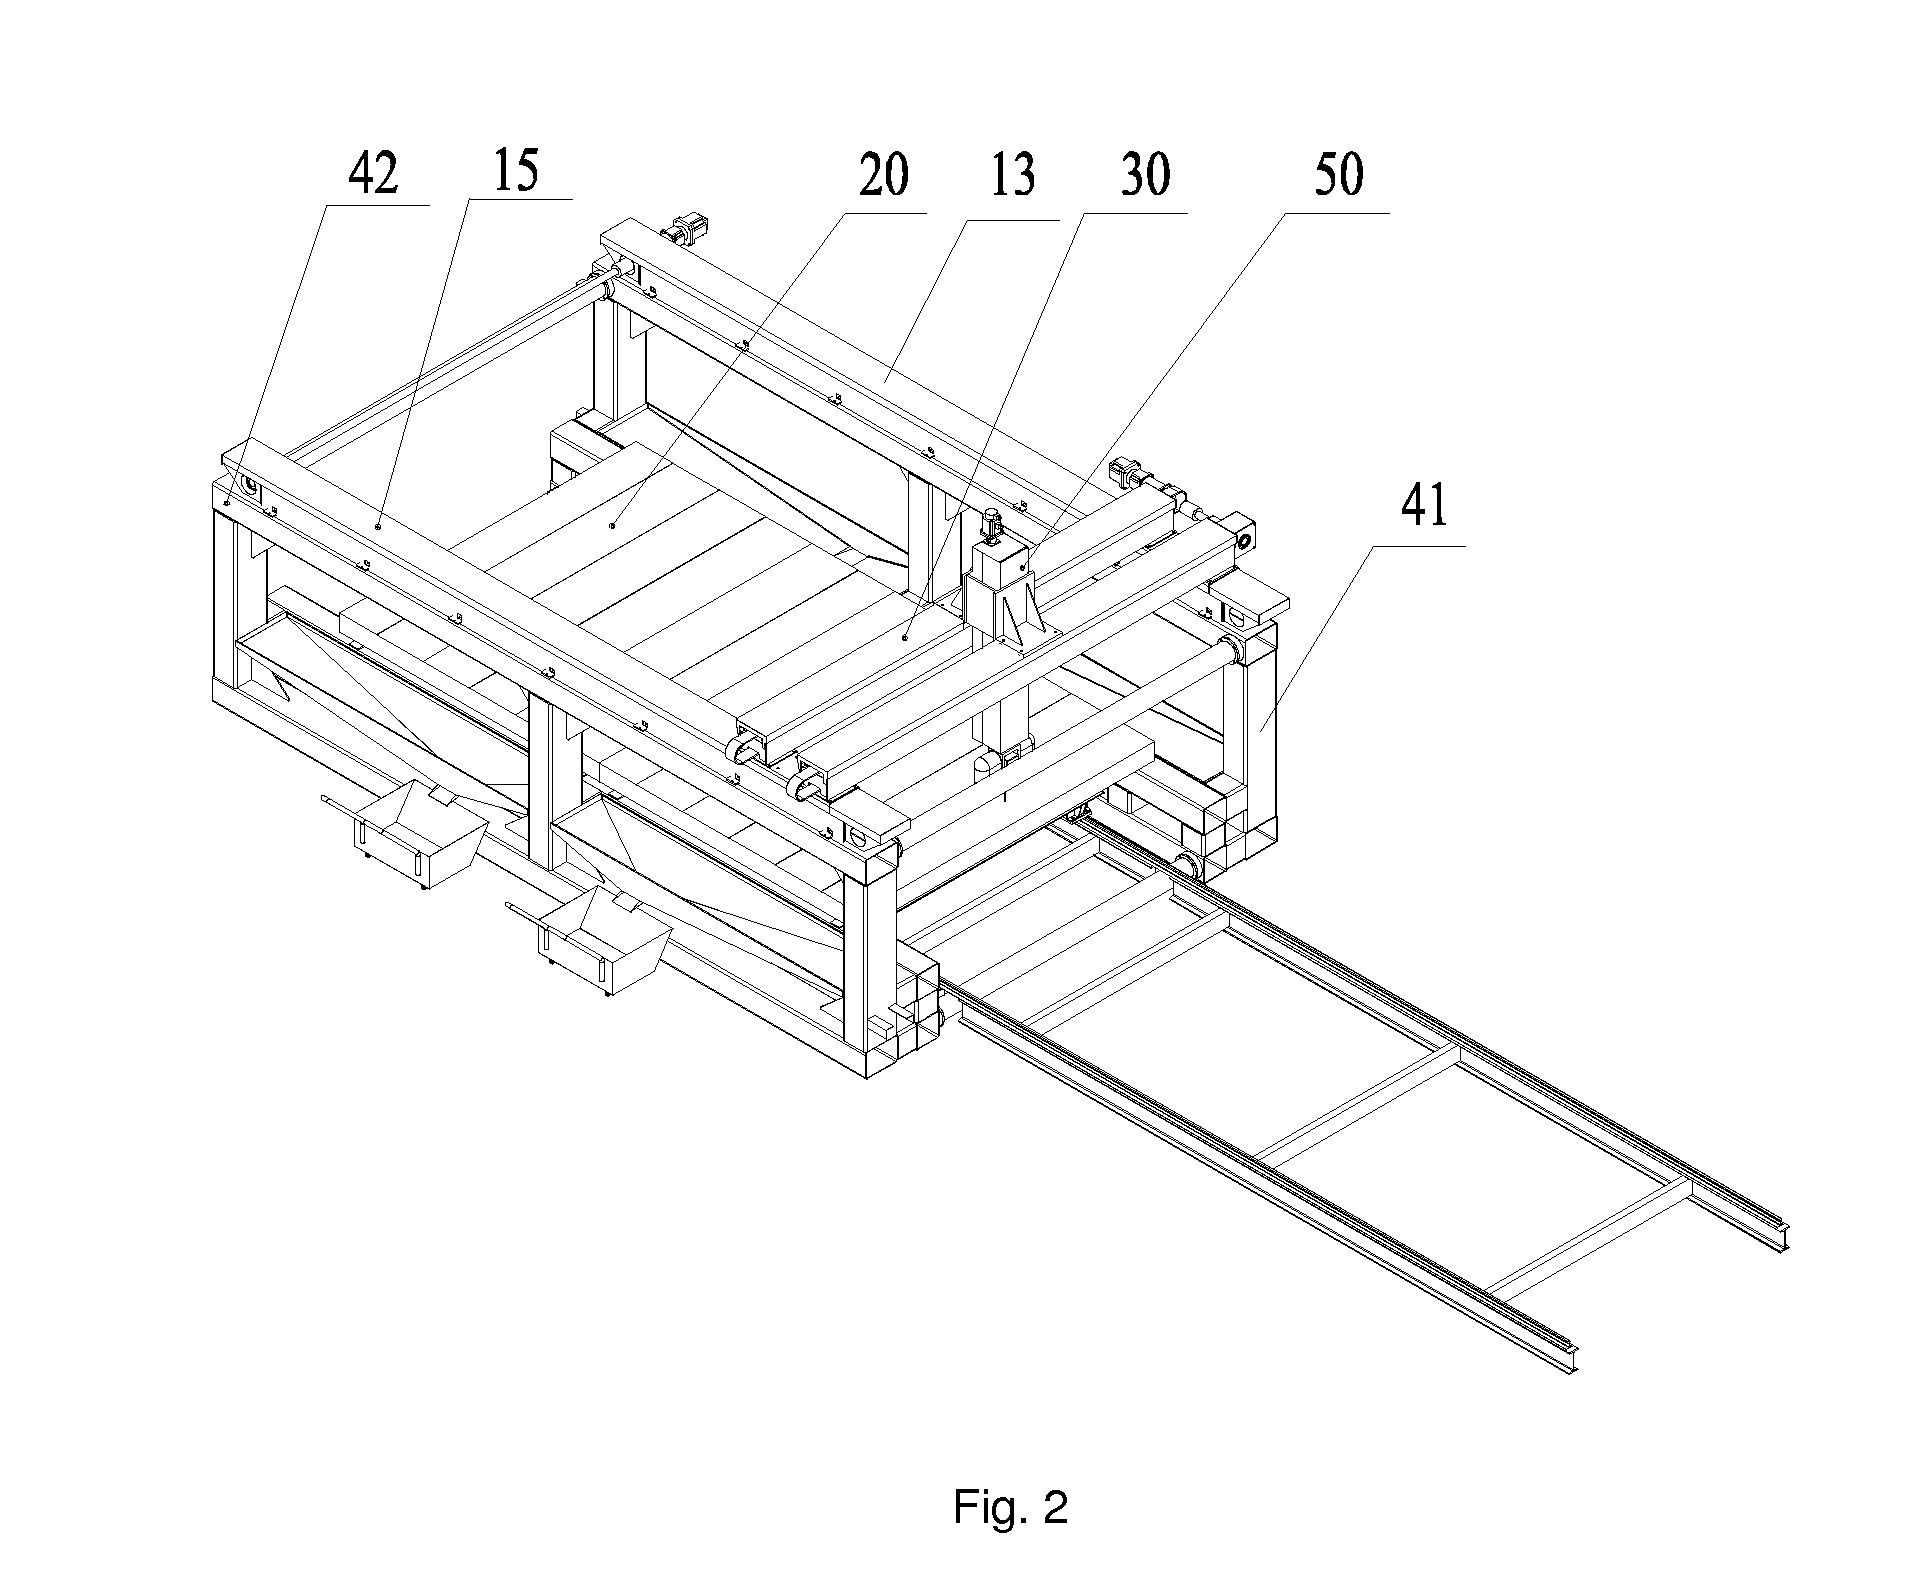 Forming machine without pattern casting